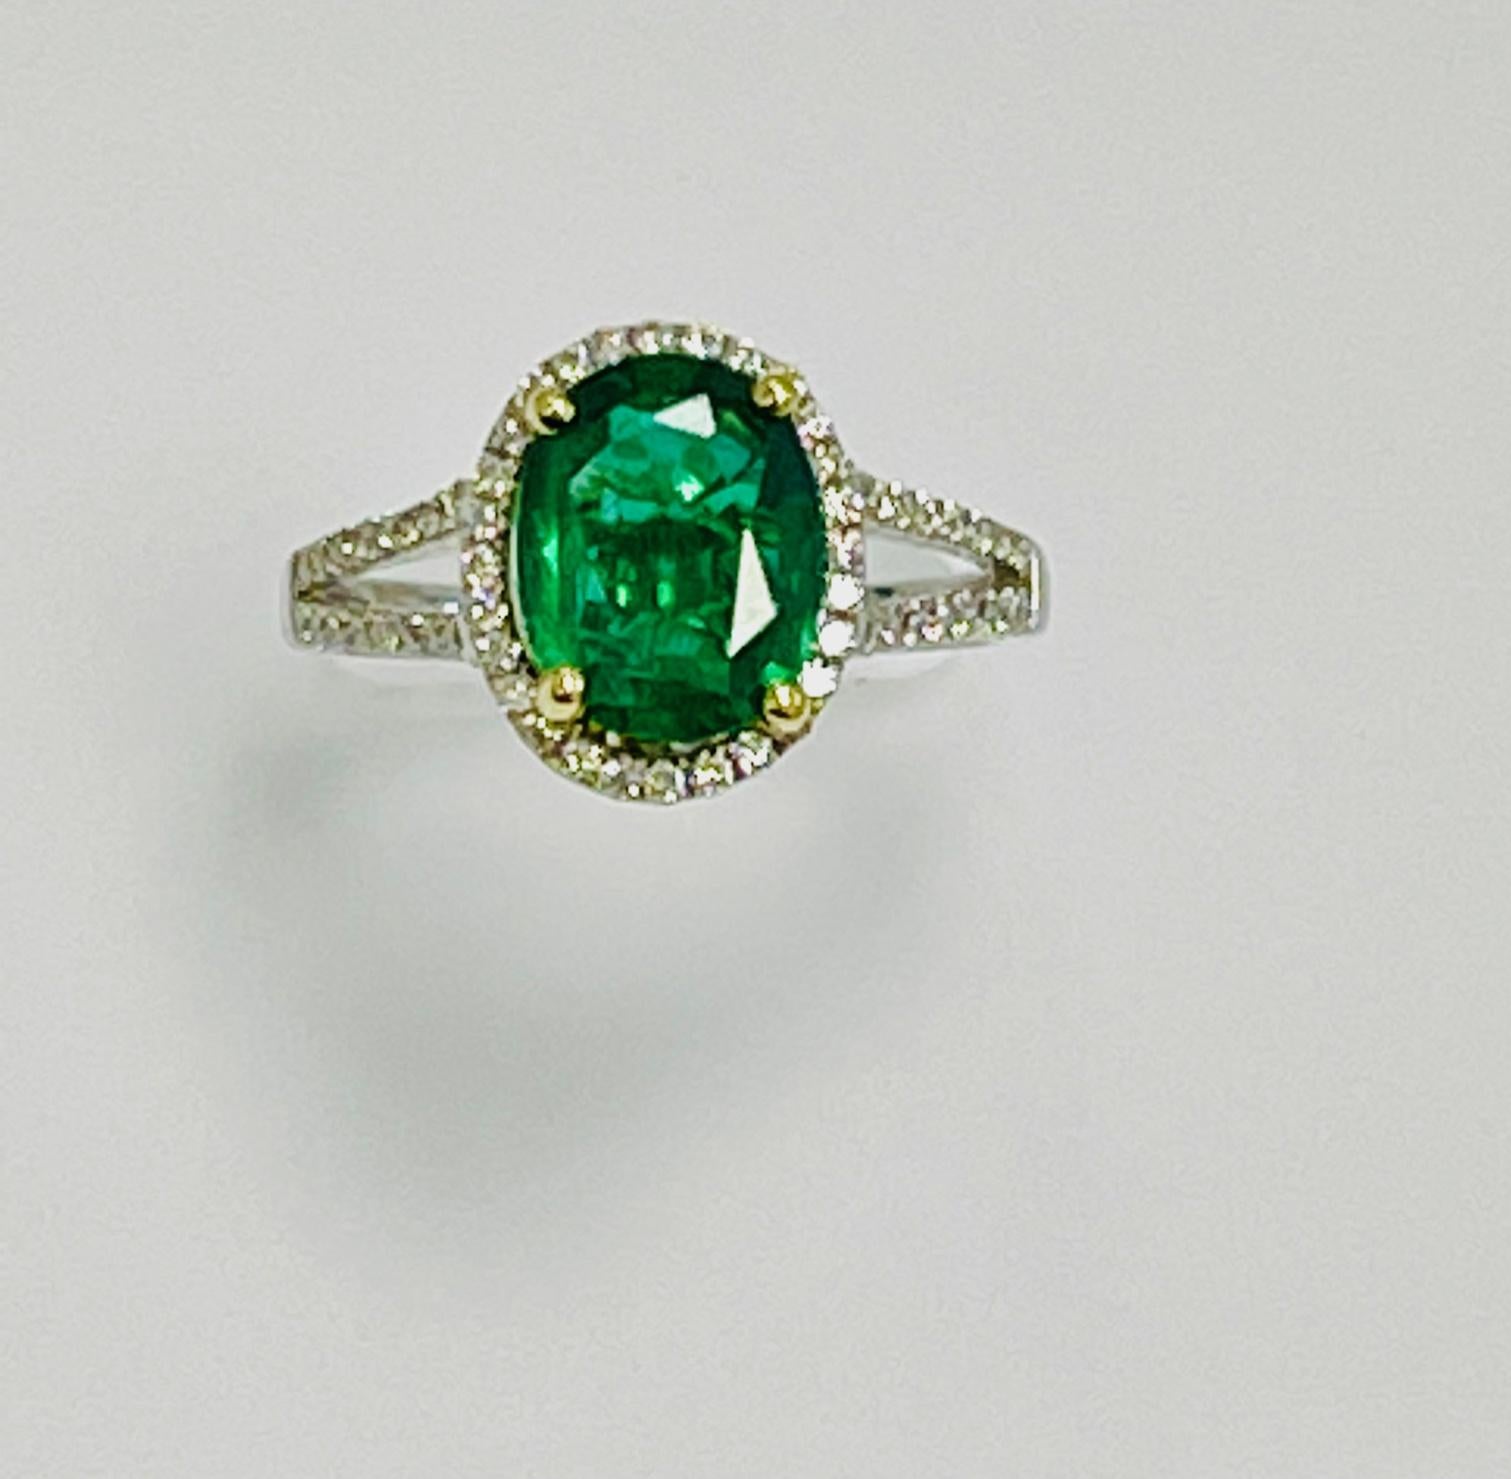 1.75 Carat Oval shape zambian emerald set in 18k white gold ring with   0.42 carat   diamonds  around it and half way on the split shank .